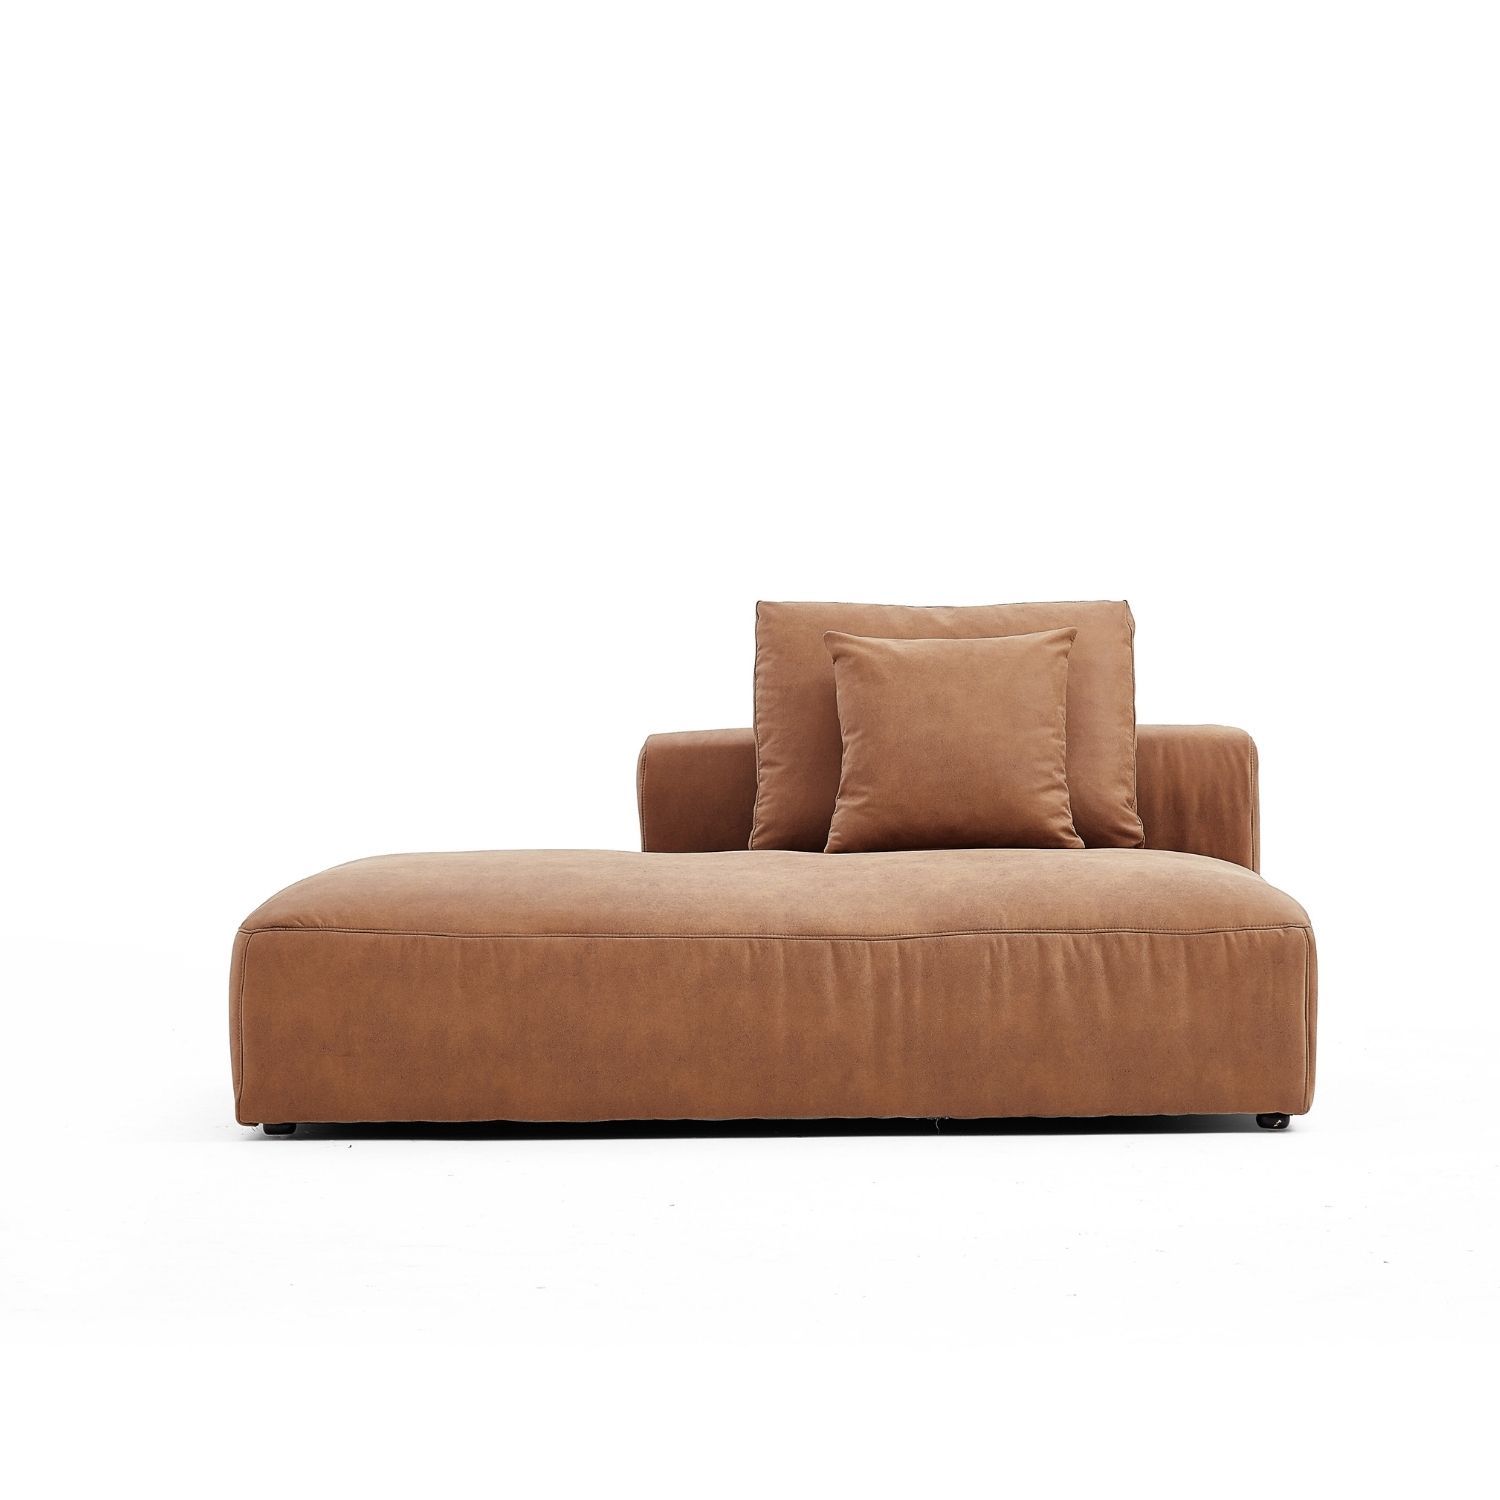 The 5th Side Lounge Sofa Foundry Camel Facing Right 71 Inch